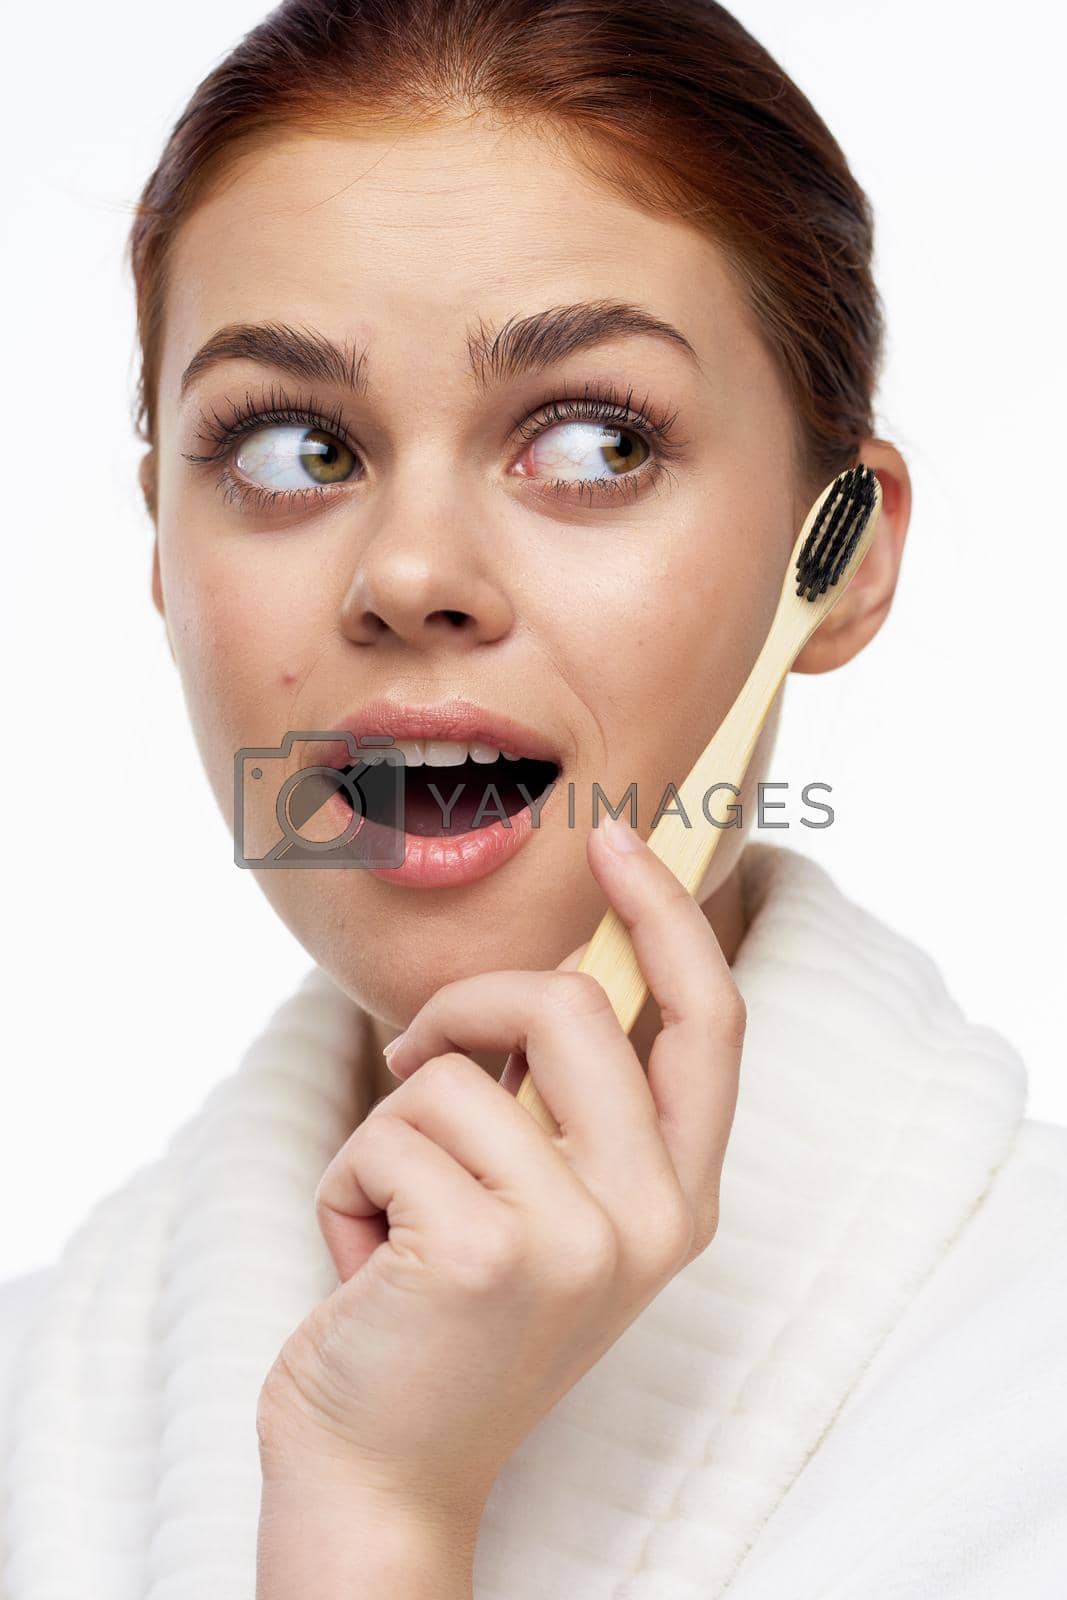 Royalty free image of Woman in white coat toothbrush oral hygiene by Vichizh